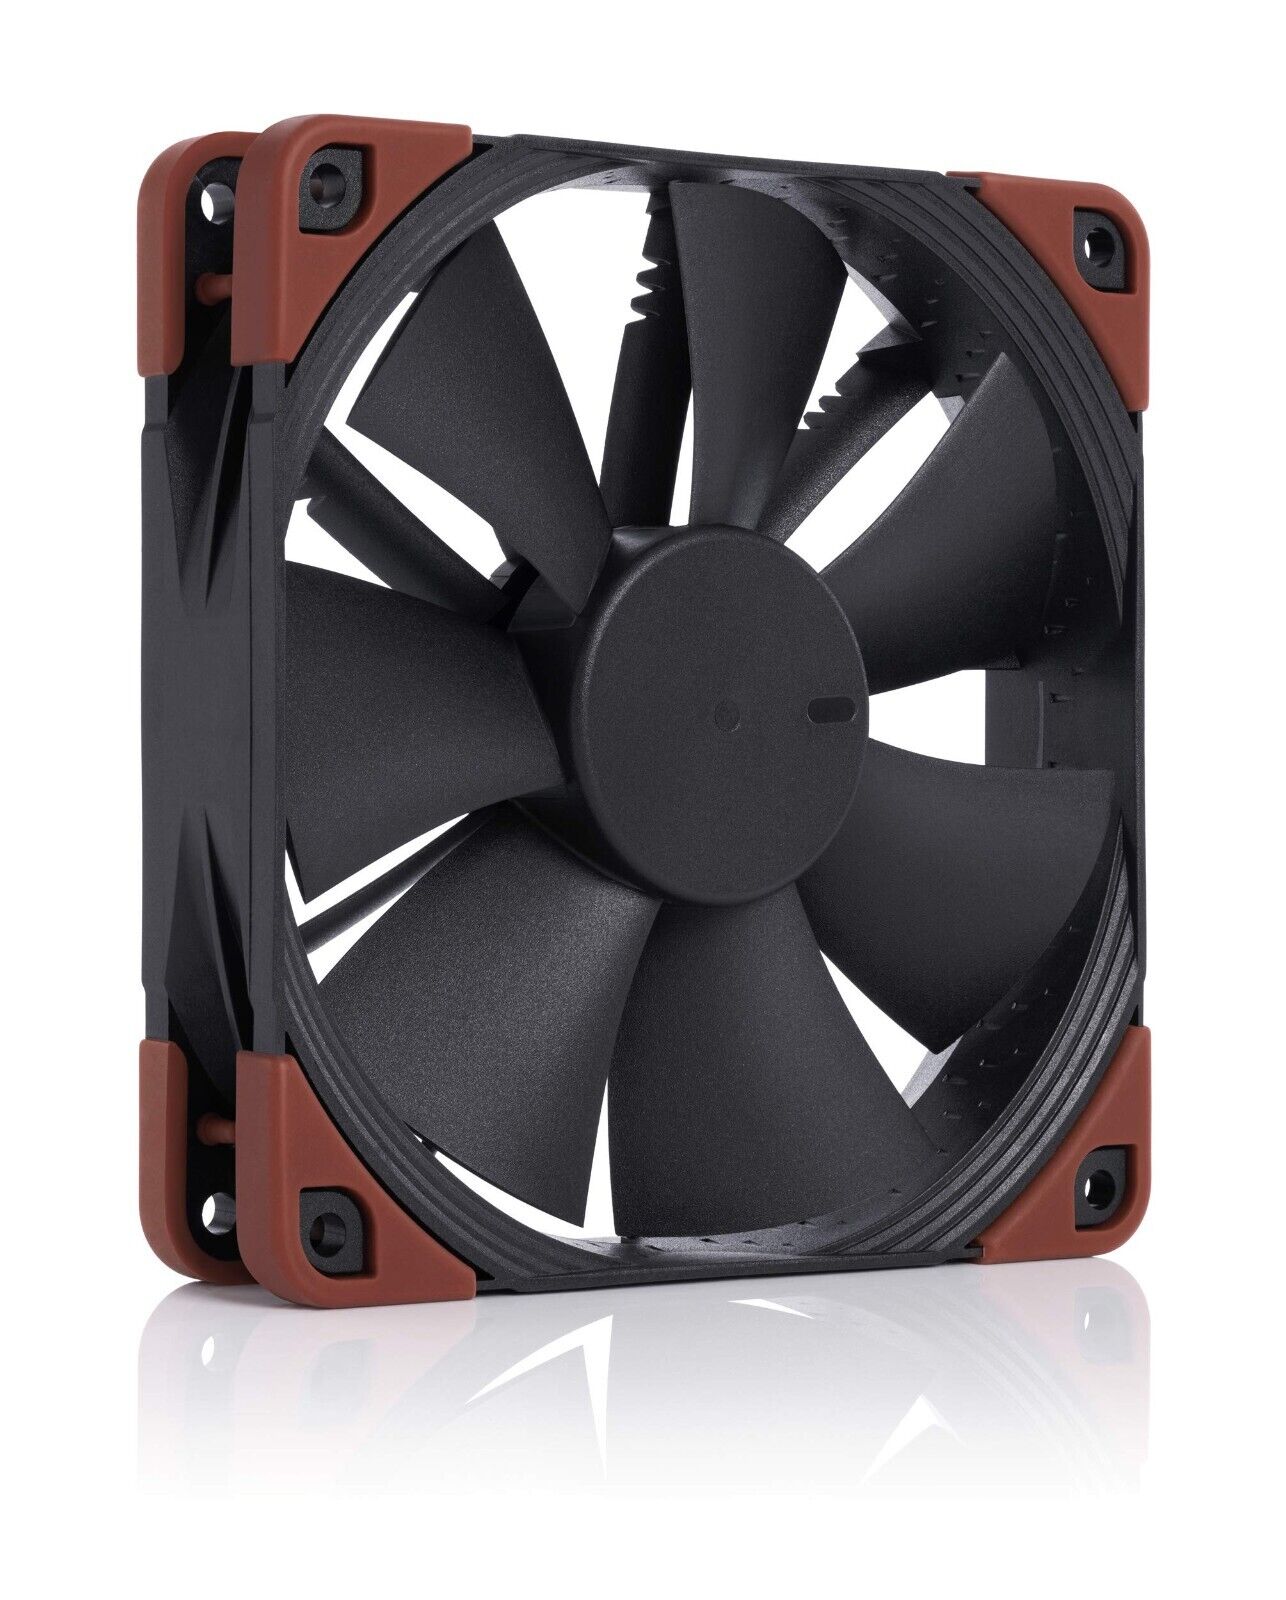 Noctua NF-F12 iPPC 3000 PWM Cooling Case Fan w/Focused Flow and SSO2 Bearing